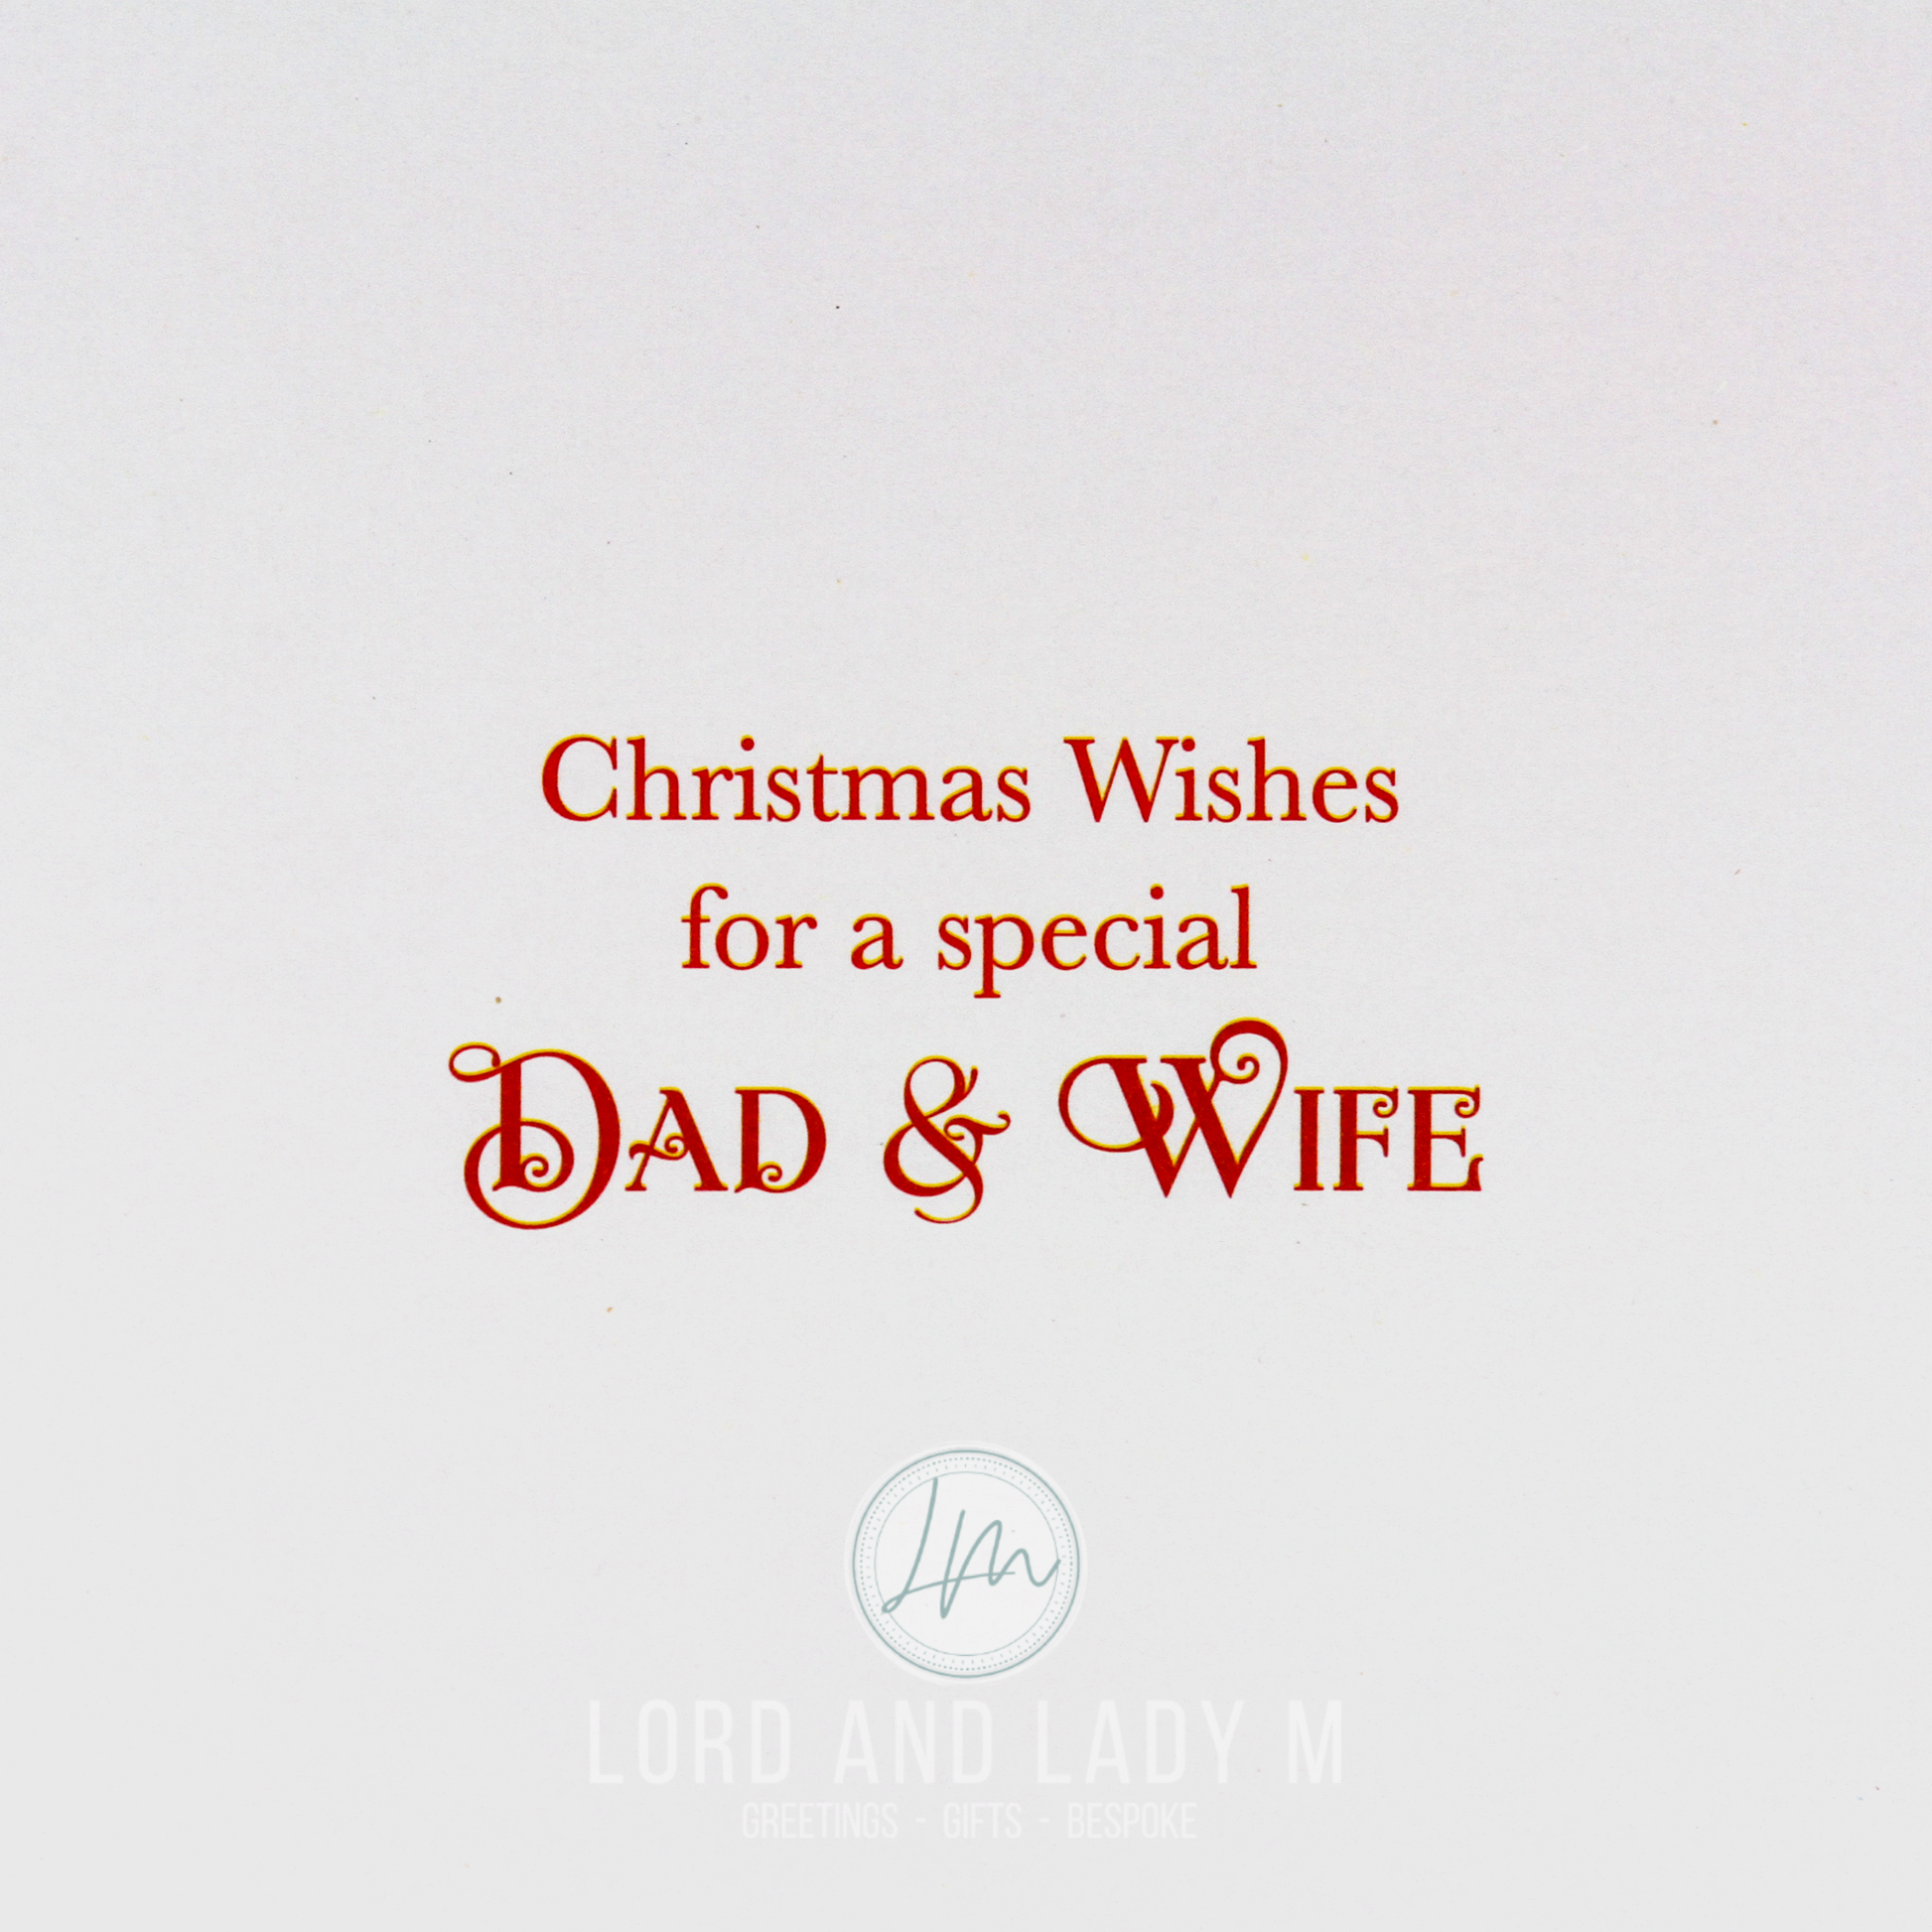 19cm - Merry Christmas Dad & Wife Wishing You - GH